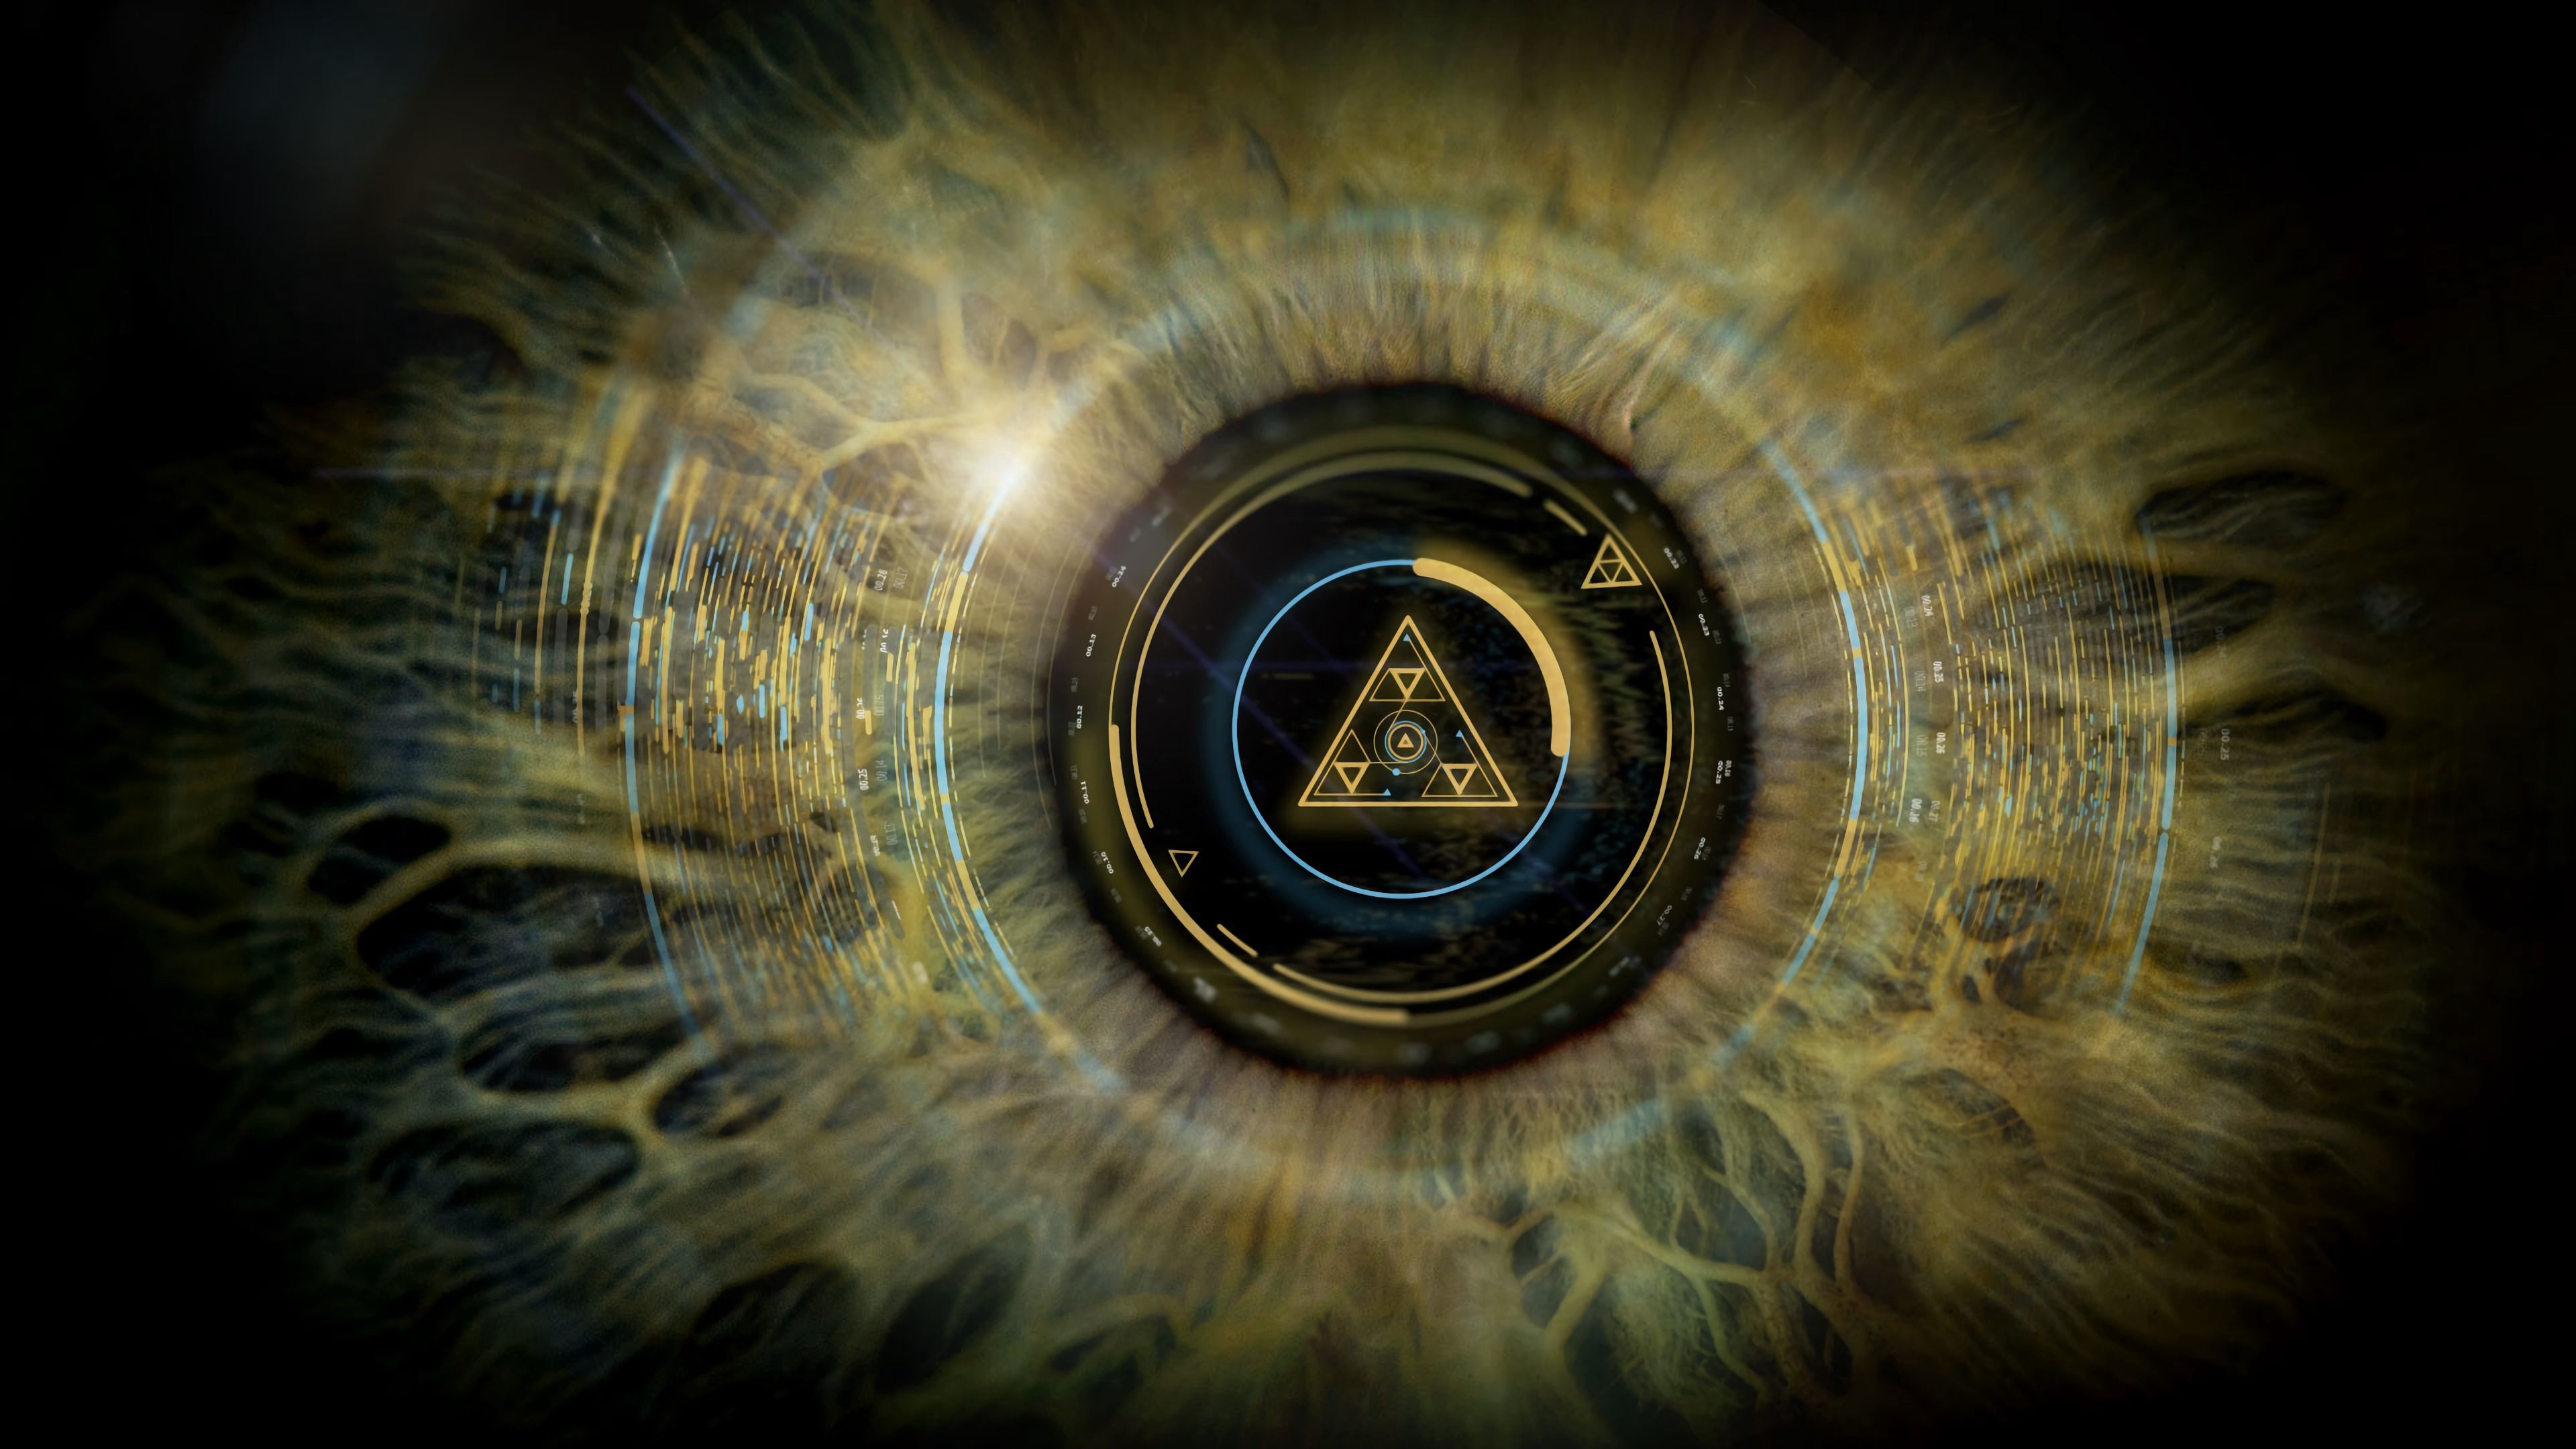 scheme, triangle, abstract, elements, eye, pupil wallpapers for tablet